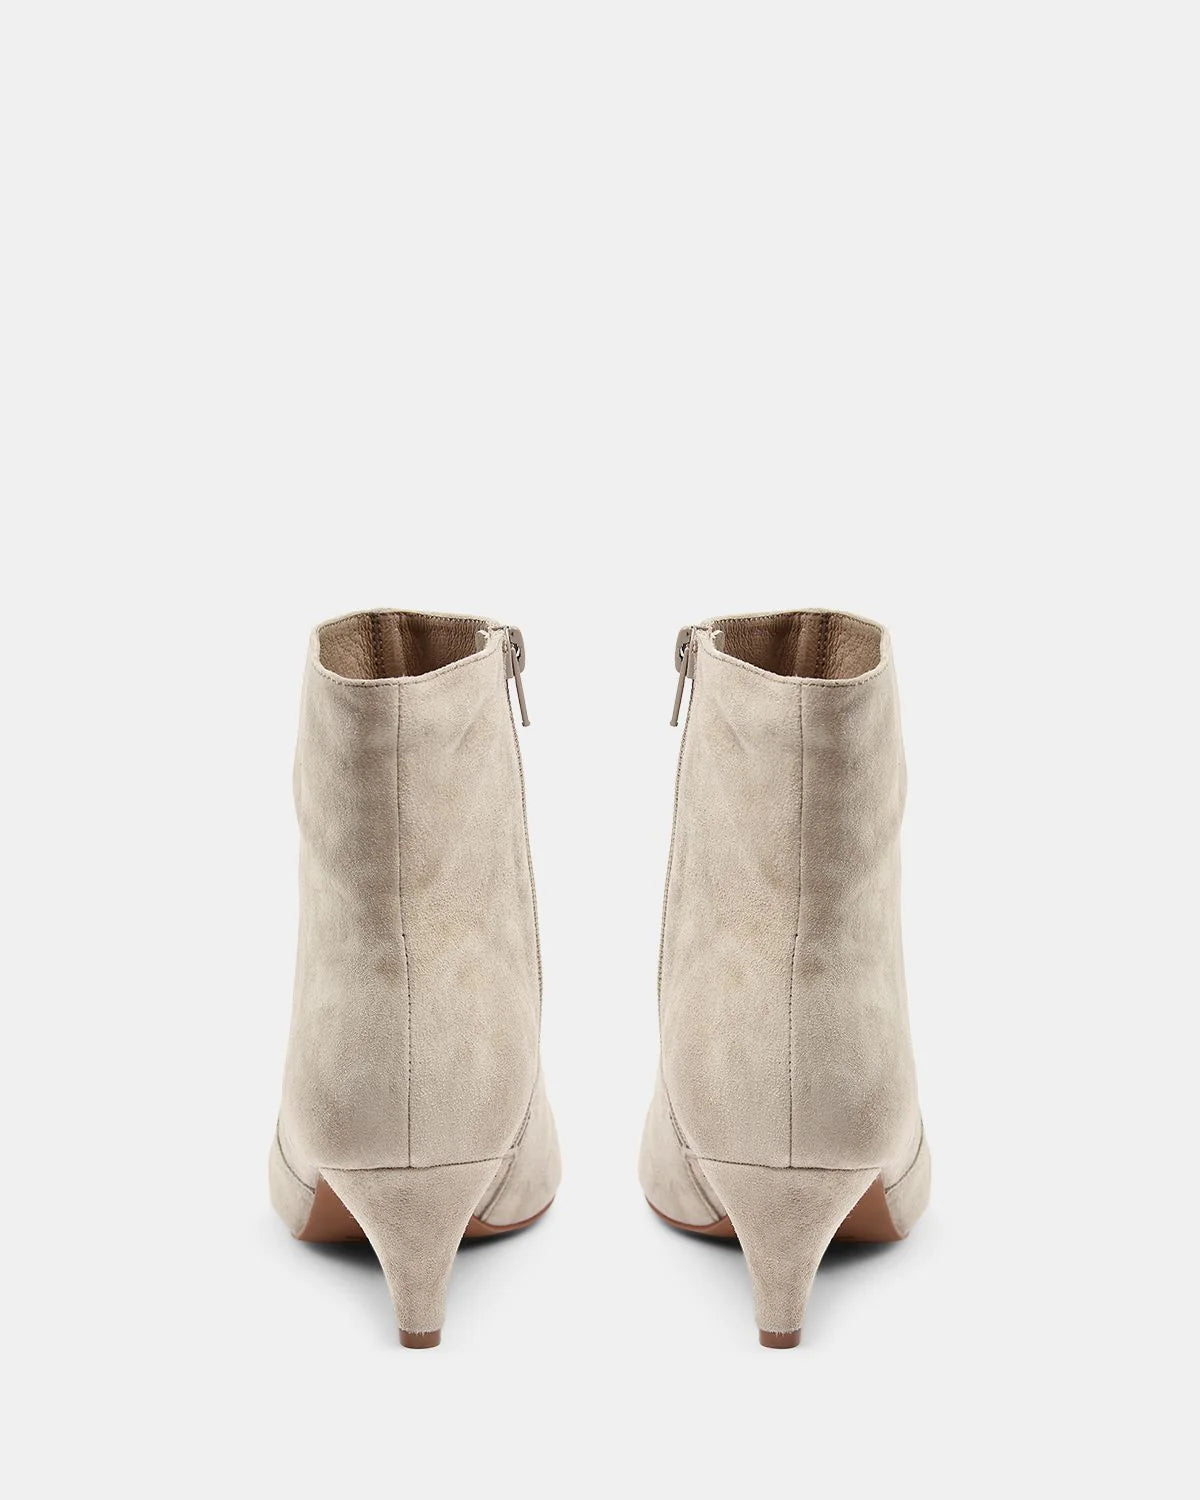 The ROCK SAND Bootie